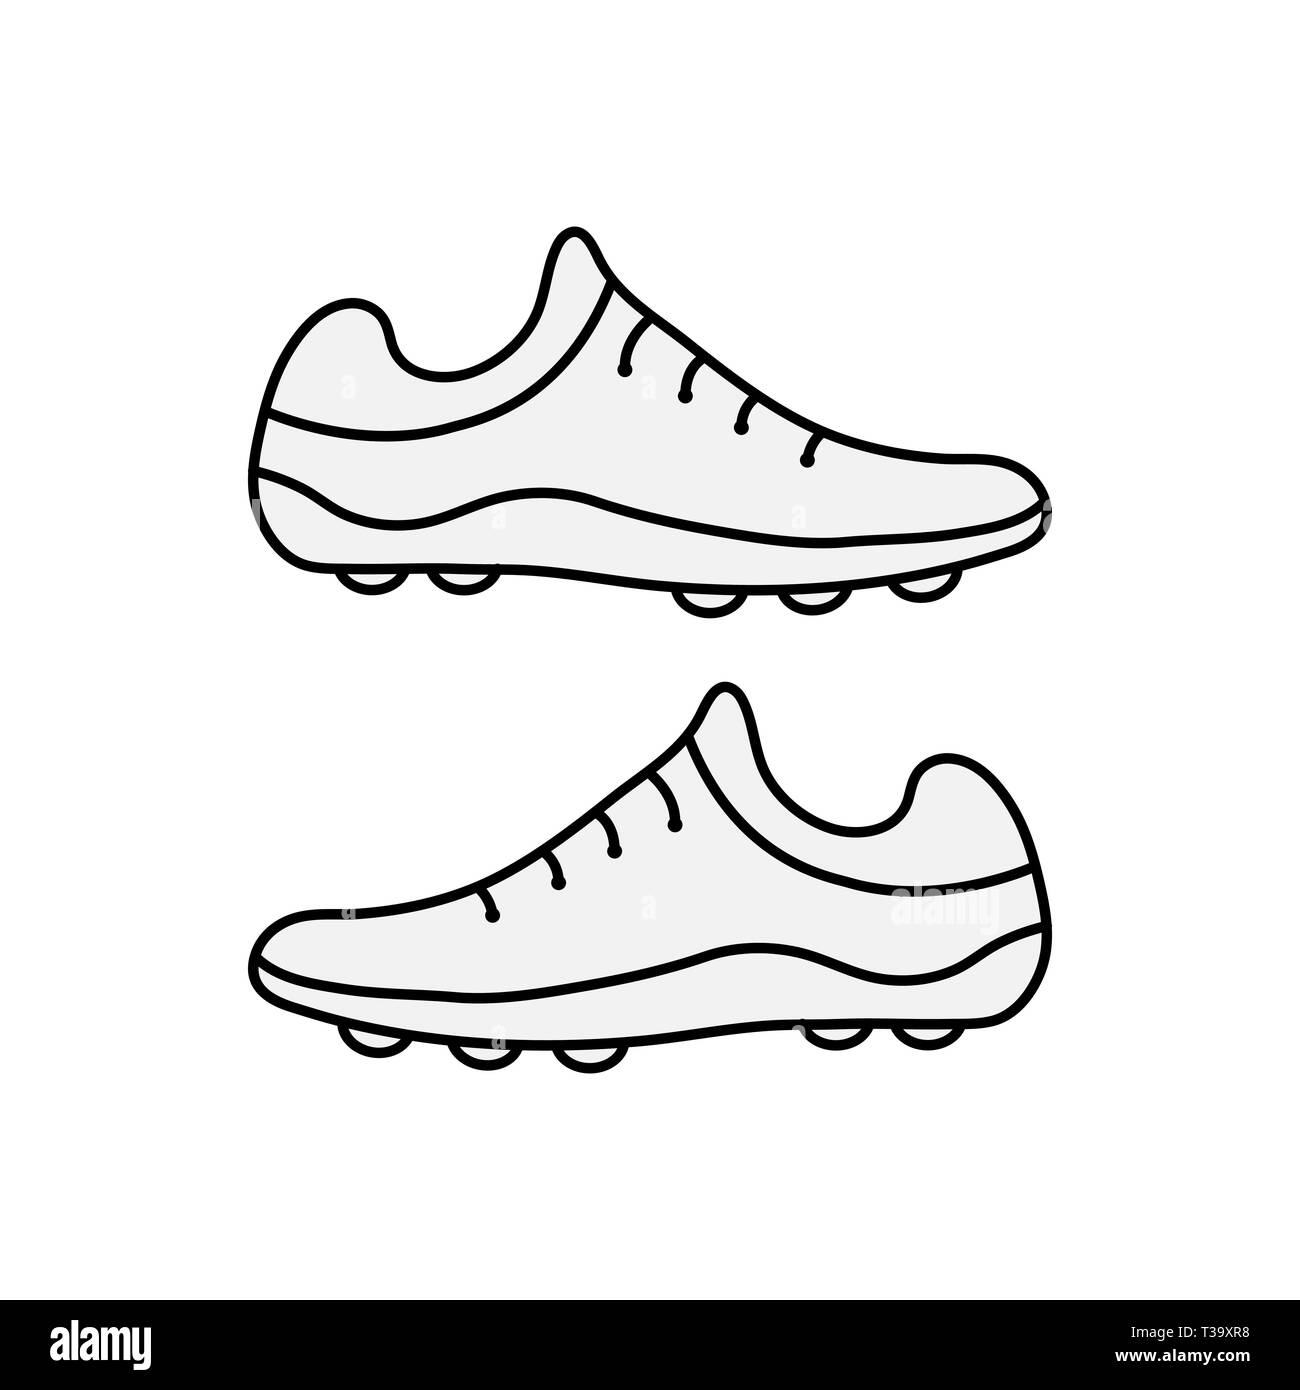 Sports shoes, running and football boots, flat design. Stock Vector